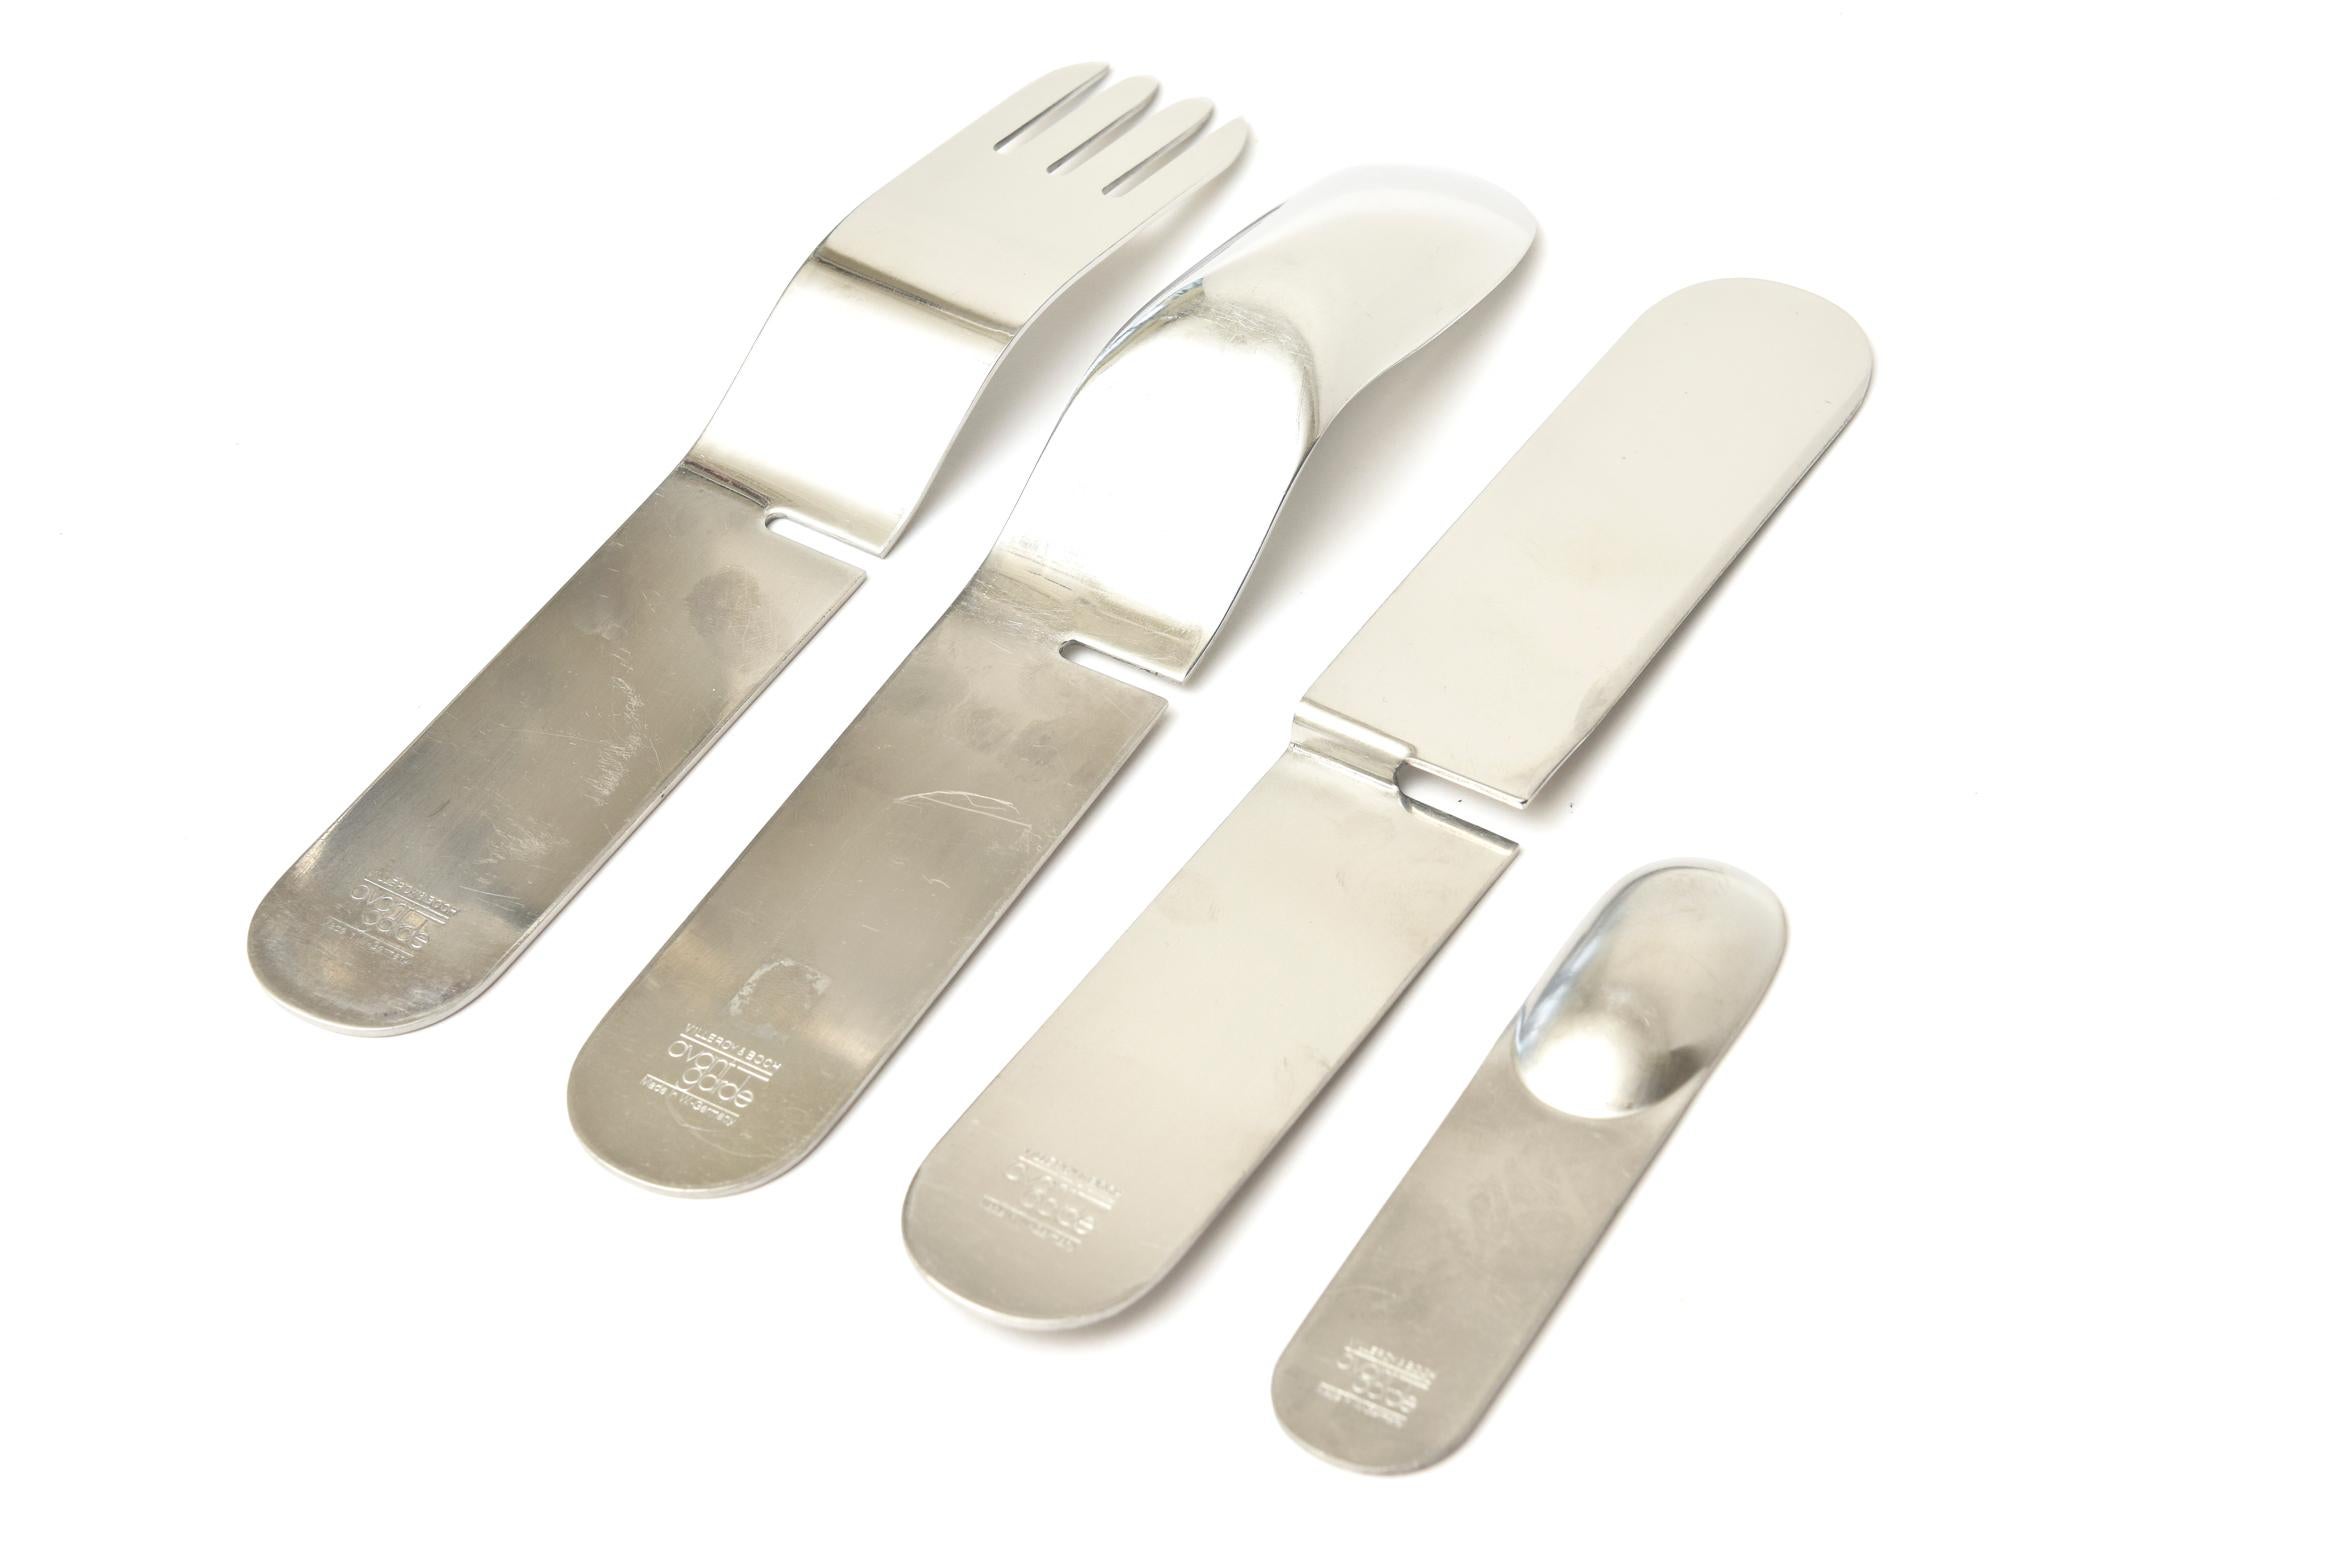 Villeroy & Boch Avant Garde Stainless Steel One Flatware Set Vintage In Good Condition For Sale In North Miami, FL